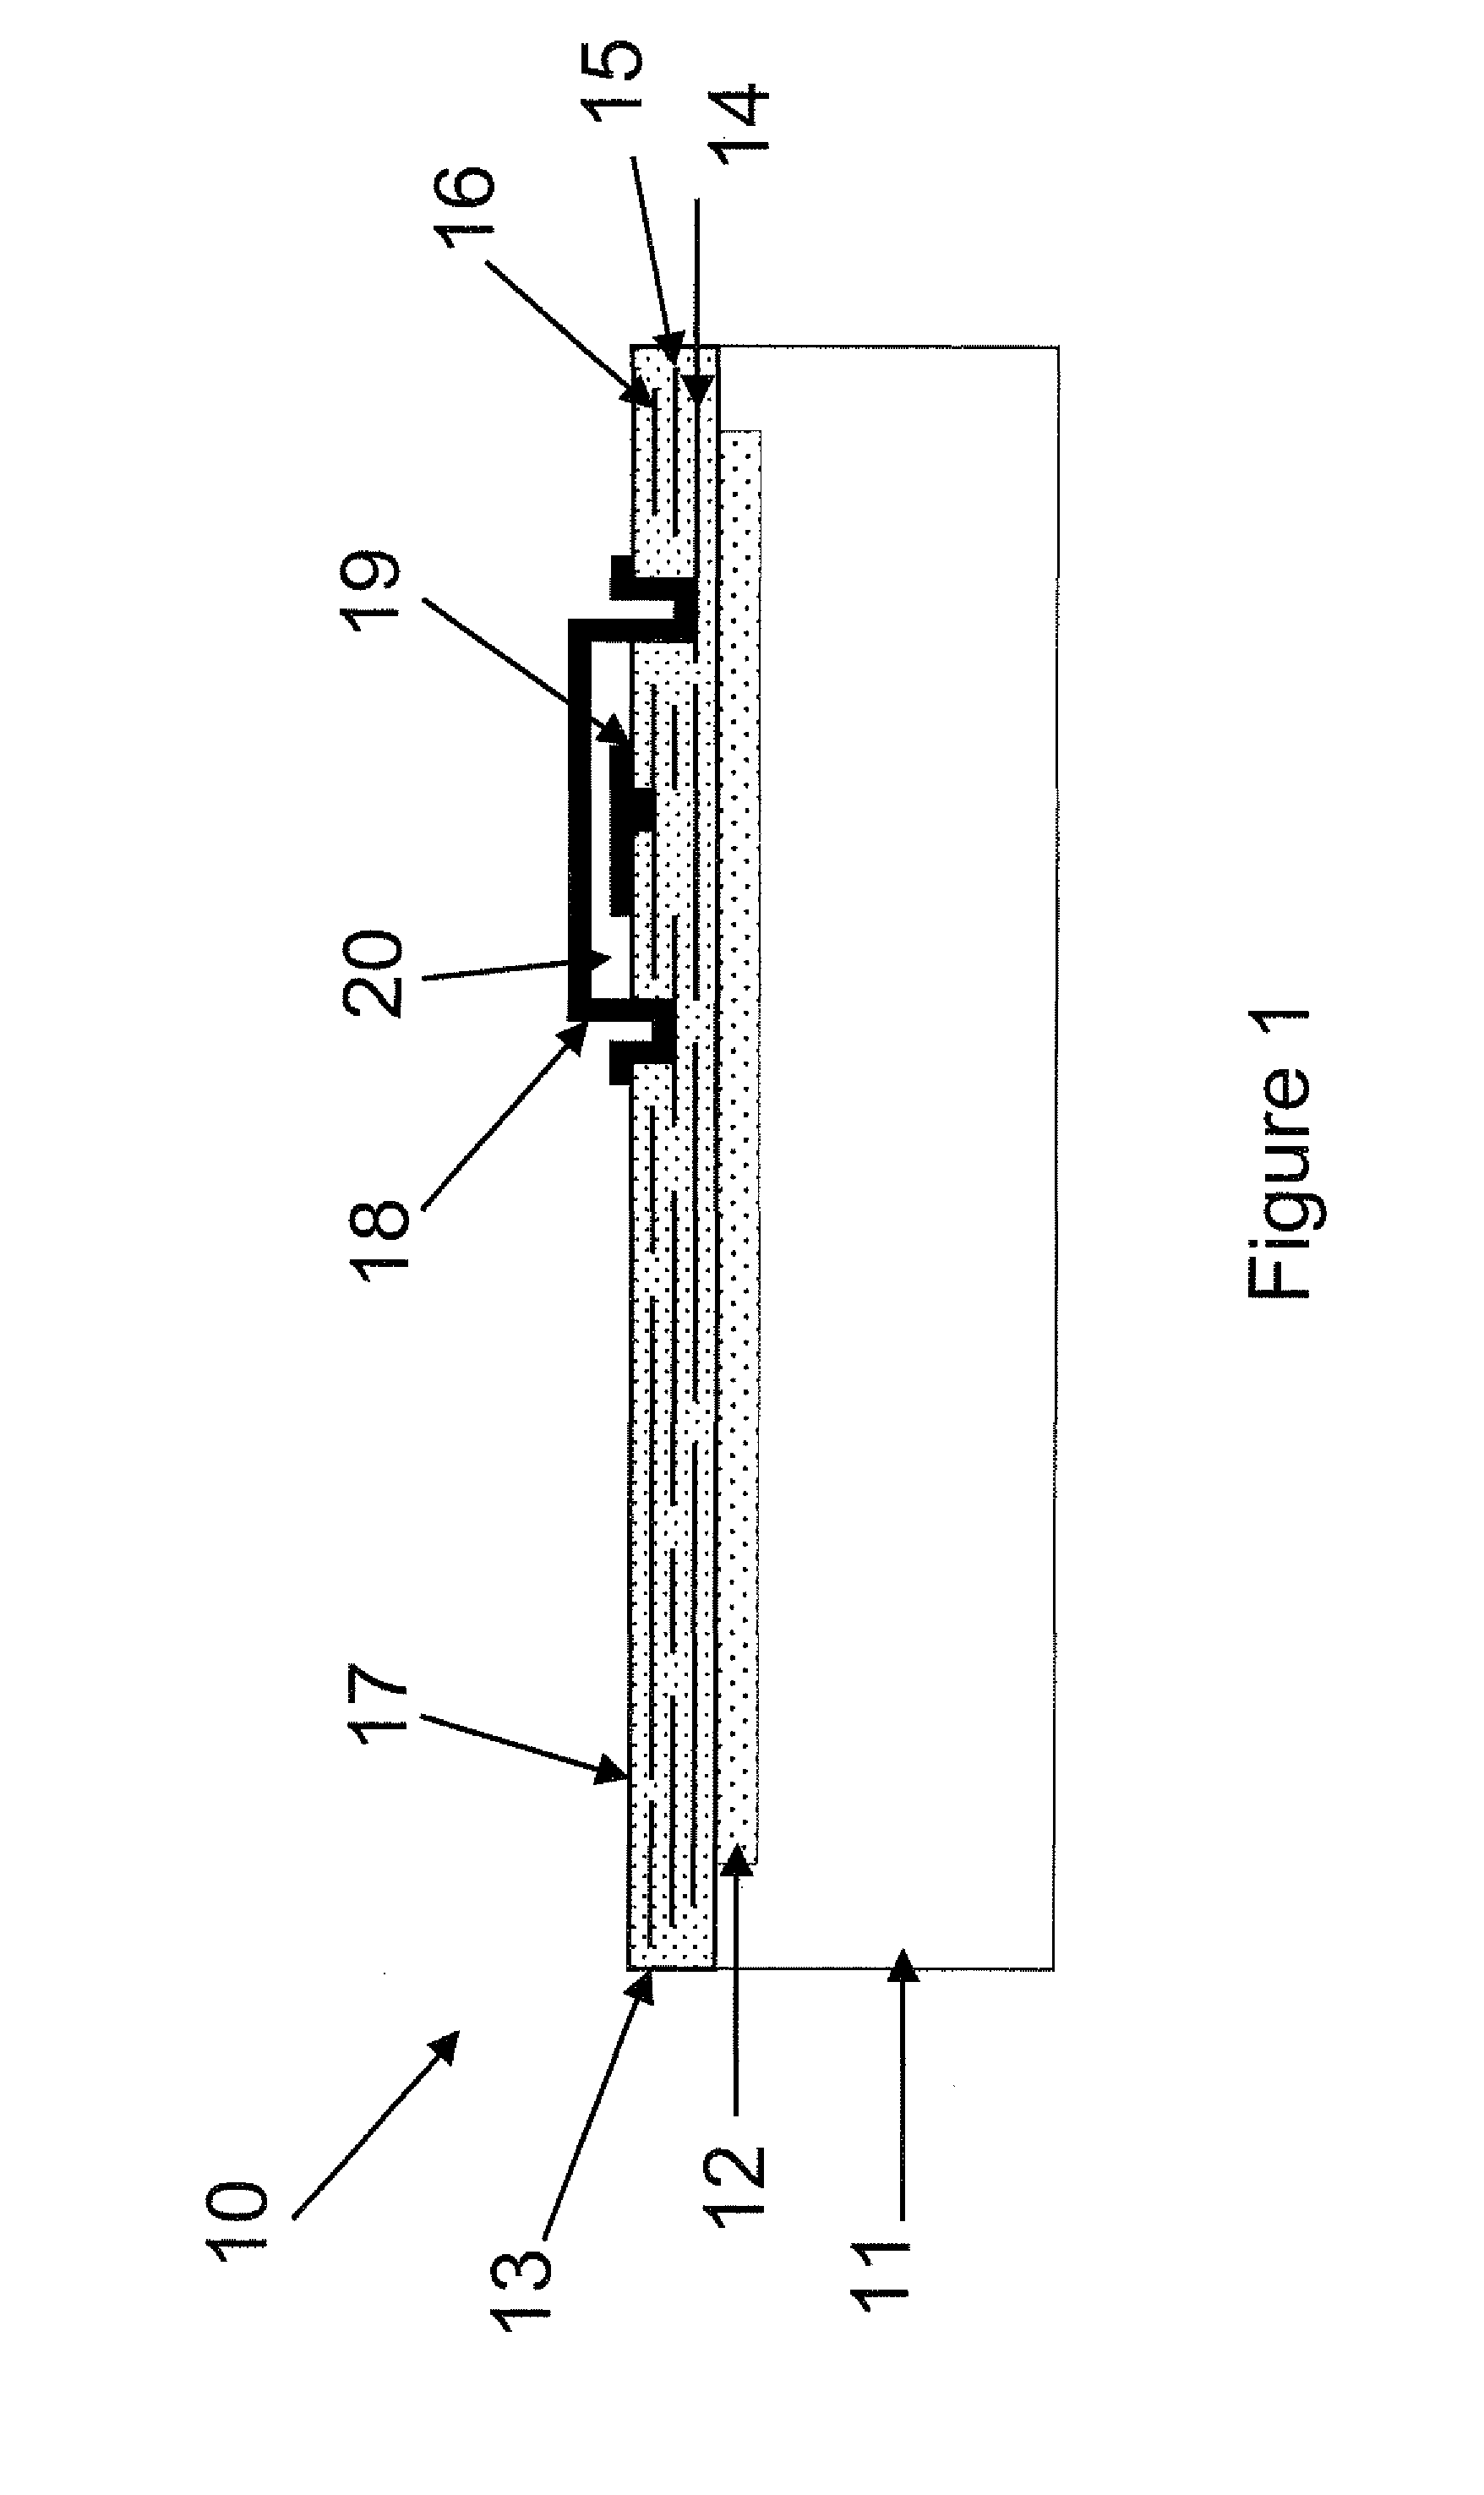 Method and system for integrated MEMS and NEMS using deposited thin films having pre-determined stress states